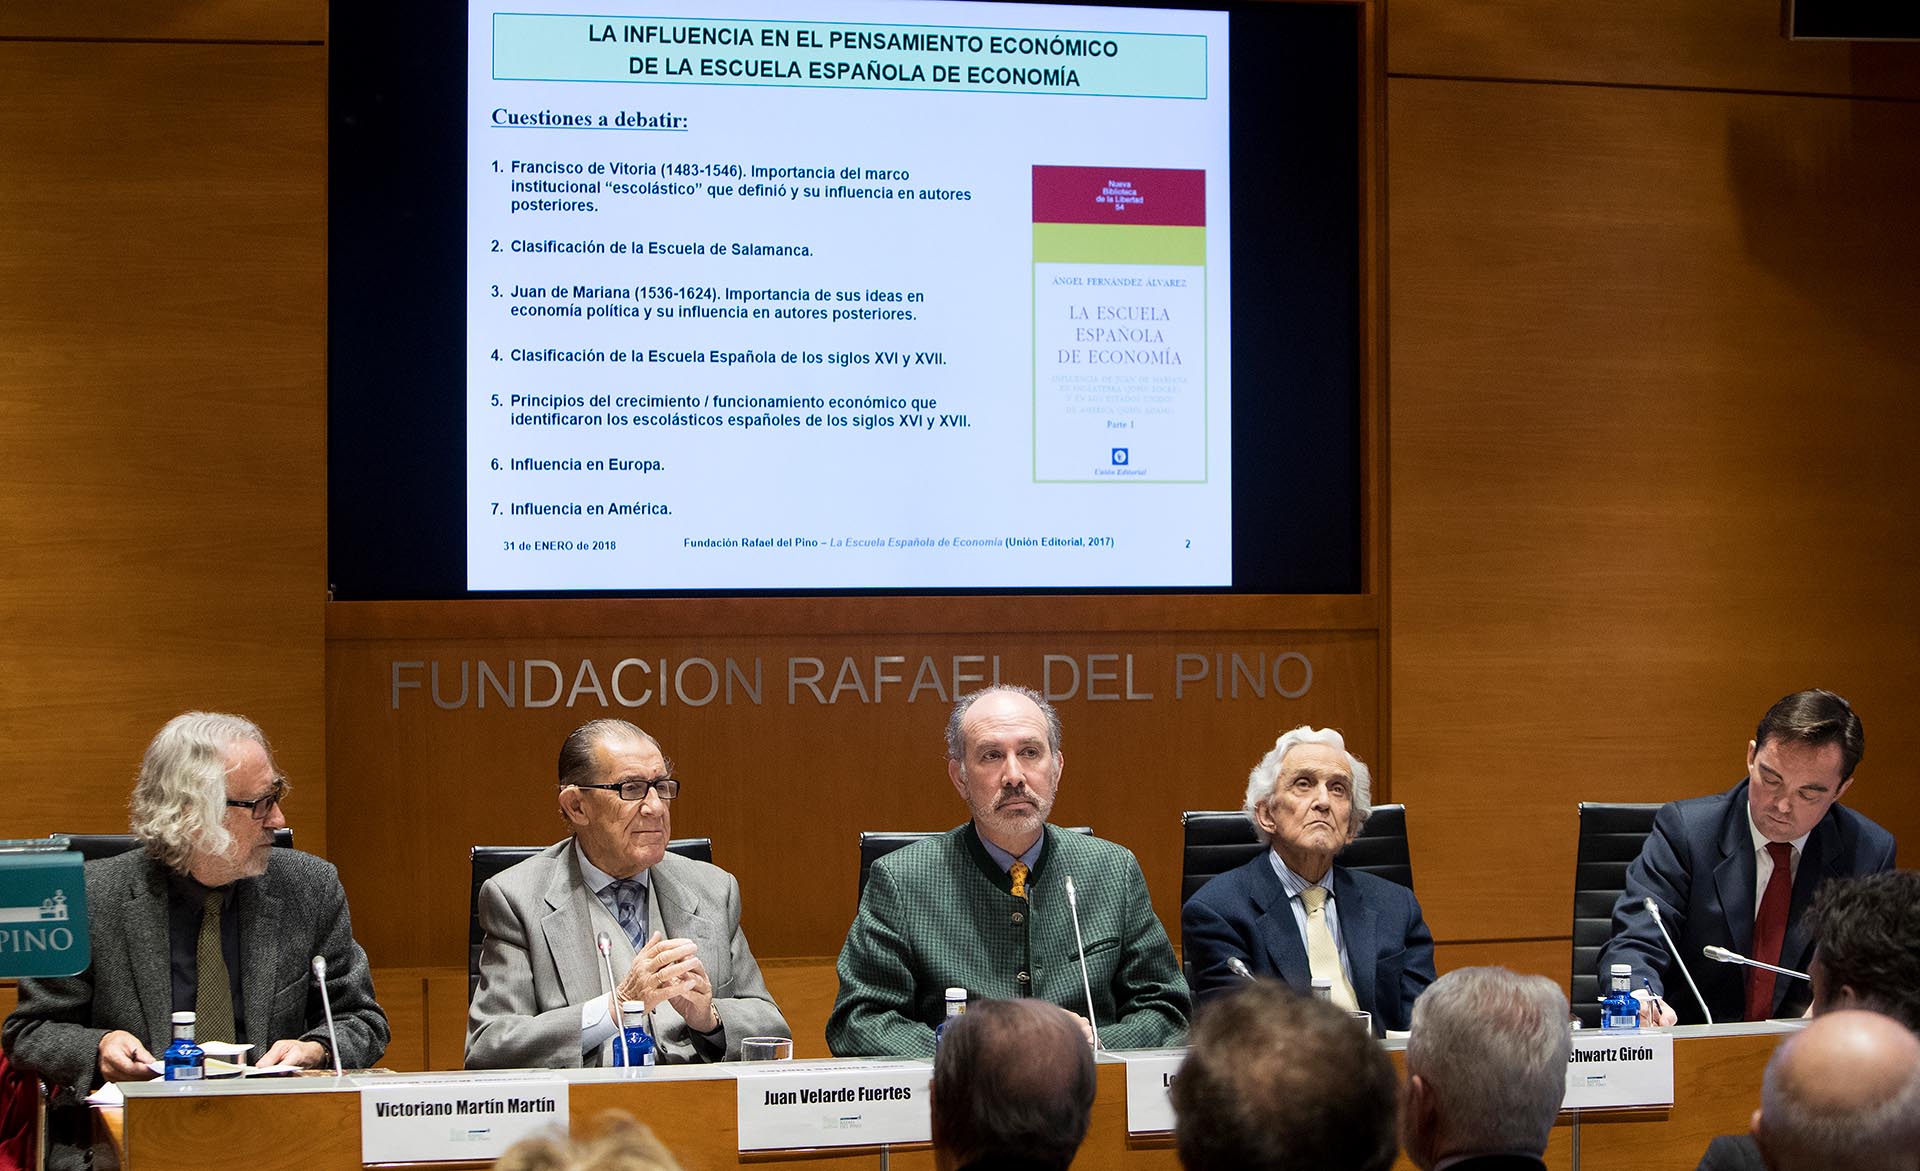 The influence of the Spanish School of Economics on economic thought